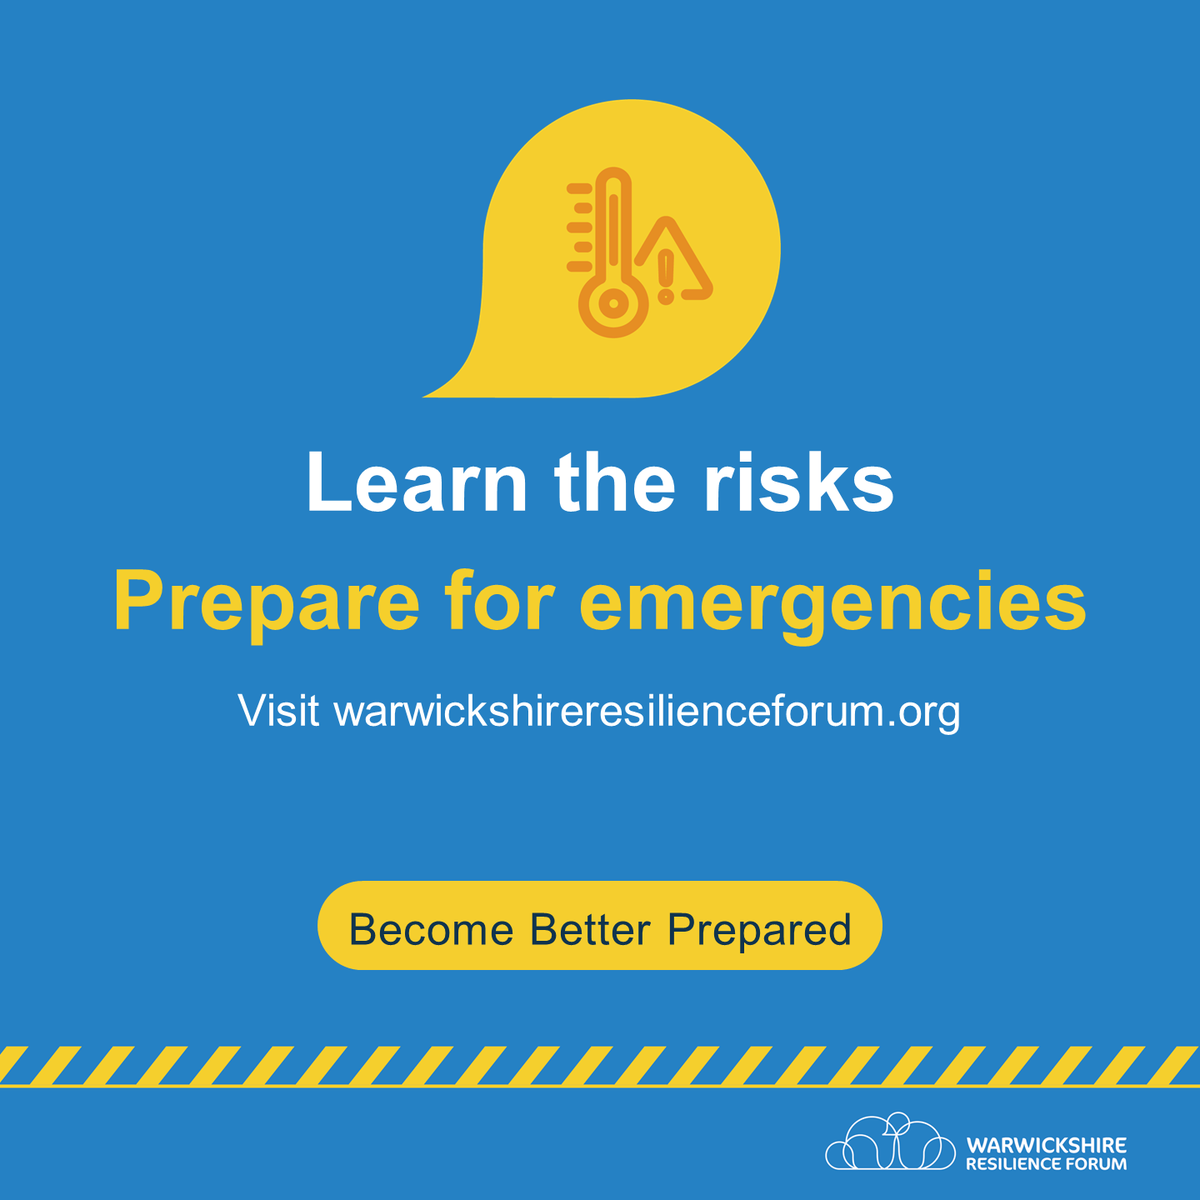 Visit the new Warwickshire Resilience Forum website to learn how you can become better prepared for emergencies in #Warwickshire. Find information and advice around the county's key risks at warwickshireresilienceforum.org